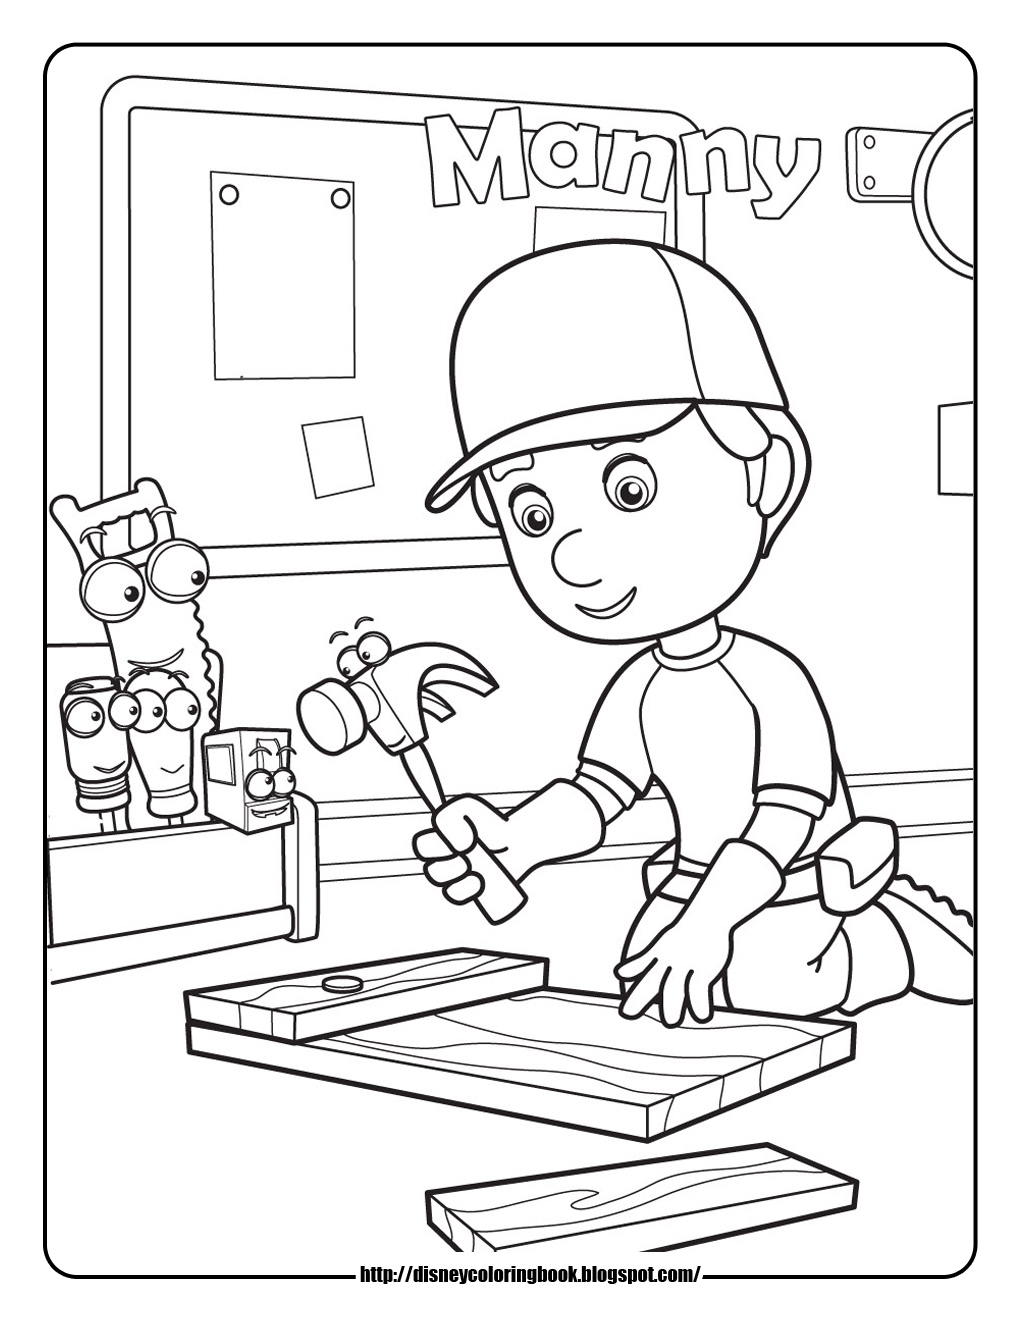 handy-manny-1-free-disney-coloring-sheets-learn-to-coloring